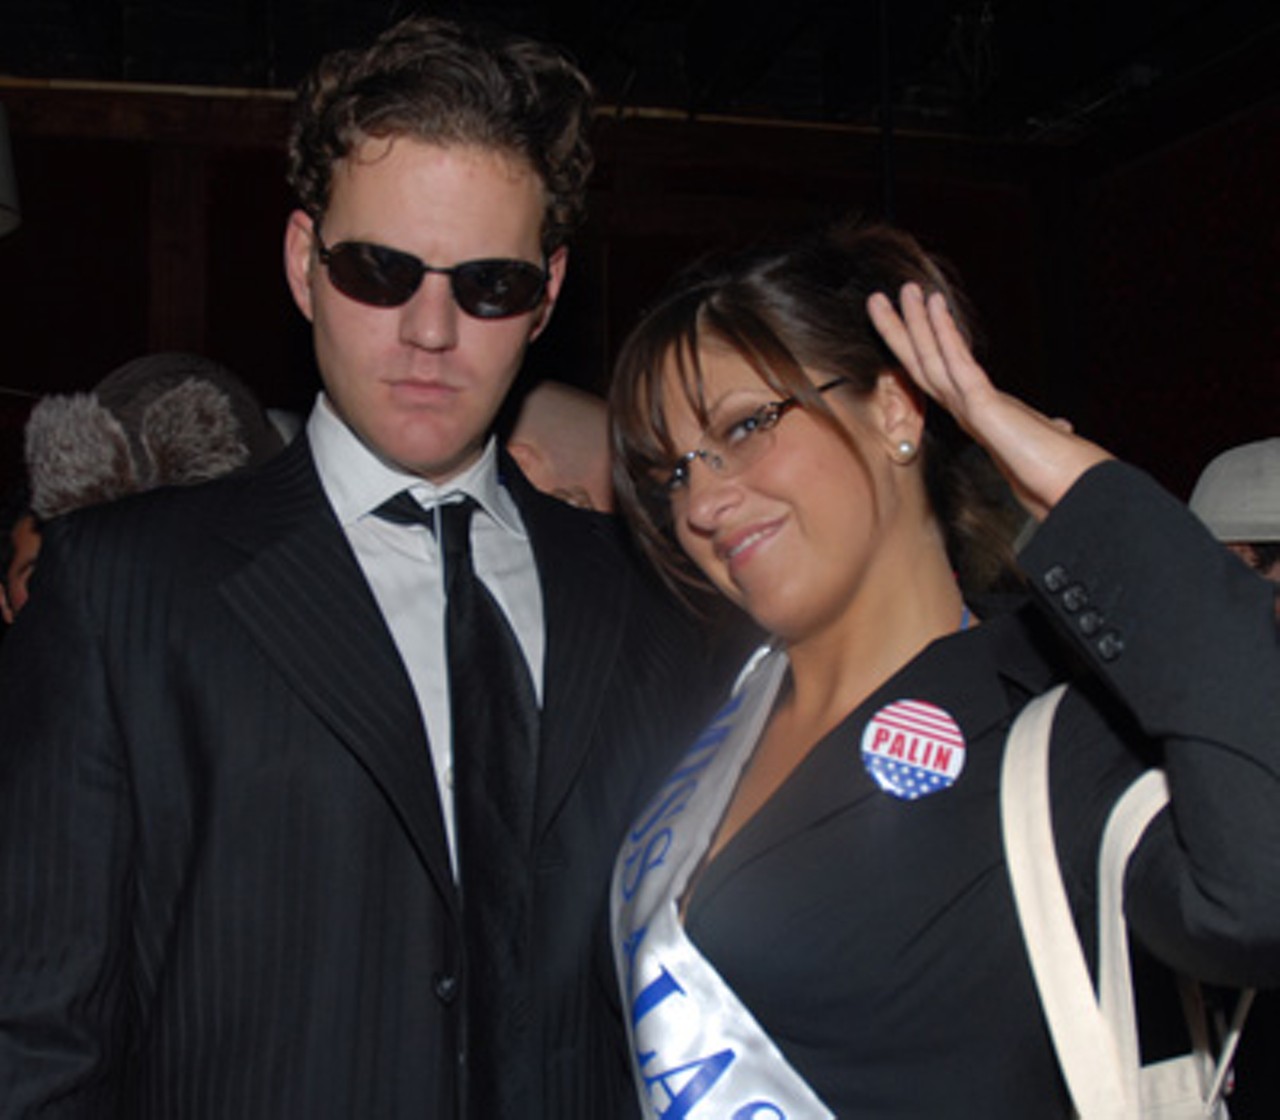 Palin (Brittney Hargraves) and her Secret Service Protection (Kyle Walsh) at Pepper Lounge.